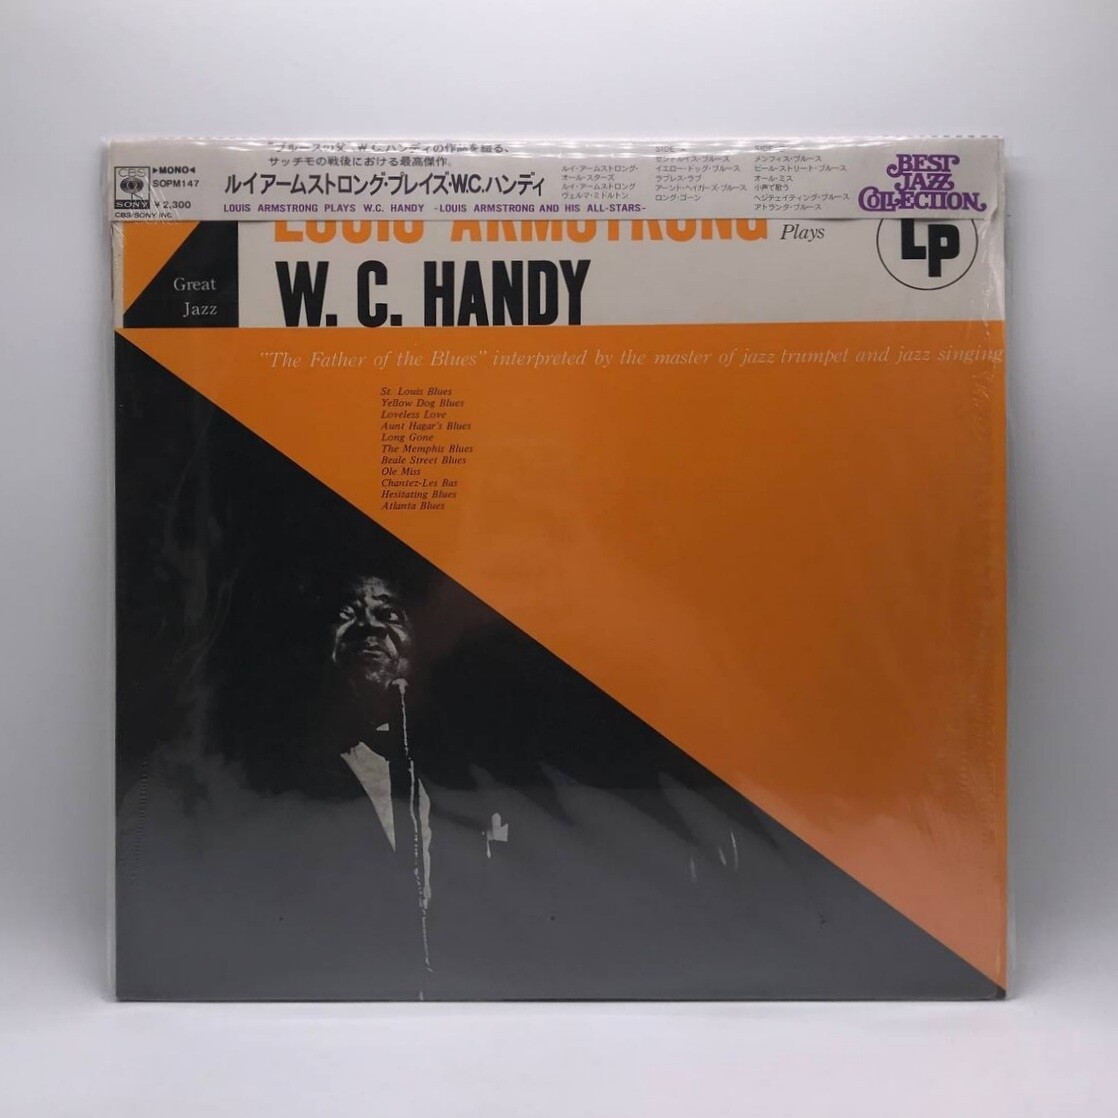 [USED] LOUIS ARMSTRONG -PLAY W.C. HANDY- LP